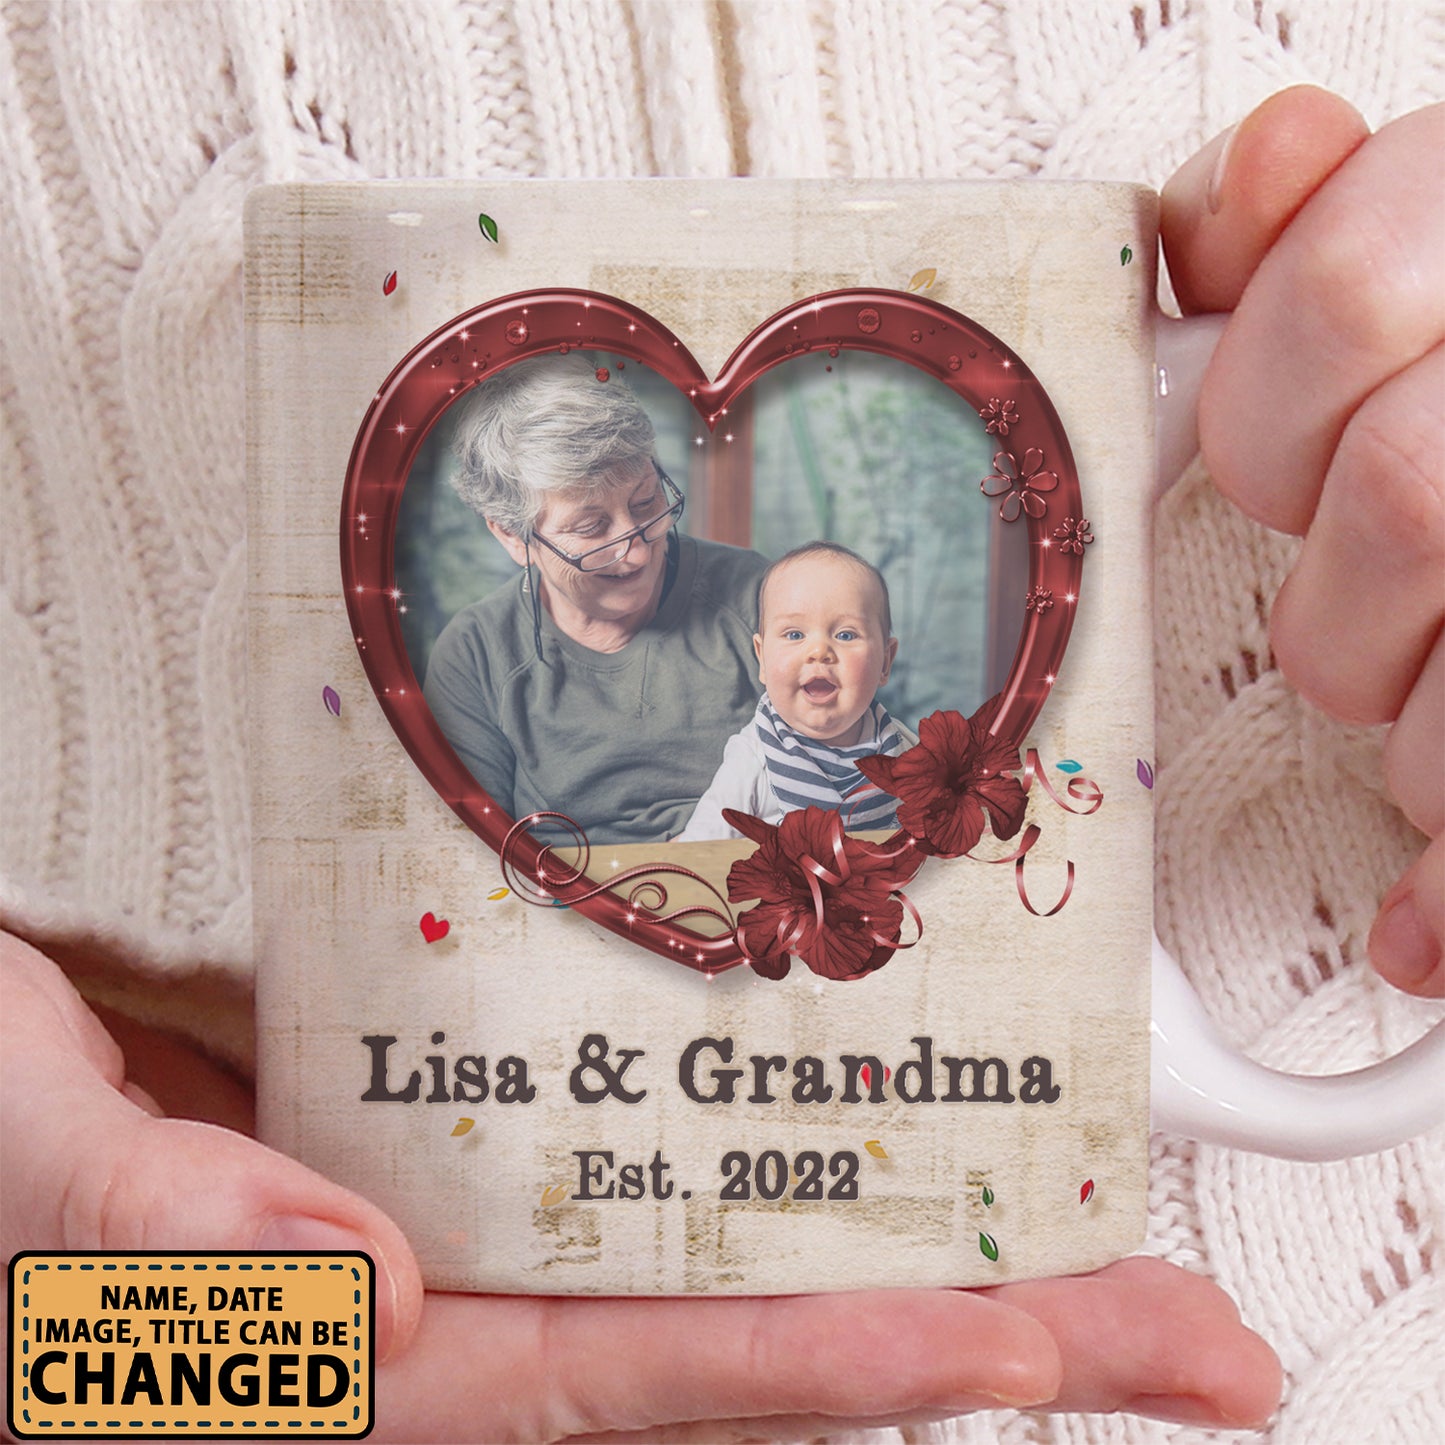 Personalized Generations The Love Between Grandmother, Mother & Children Is Forever New Grandma Gifts Custom Grandkids Photo, Names Personalizedwitch